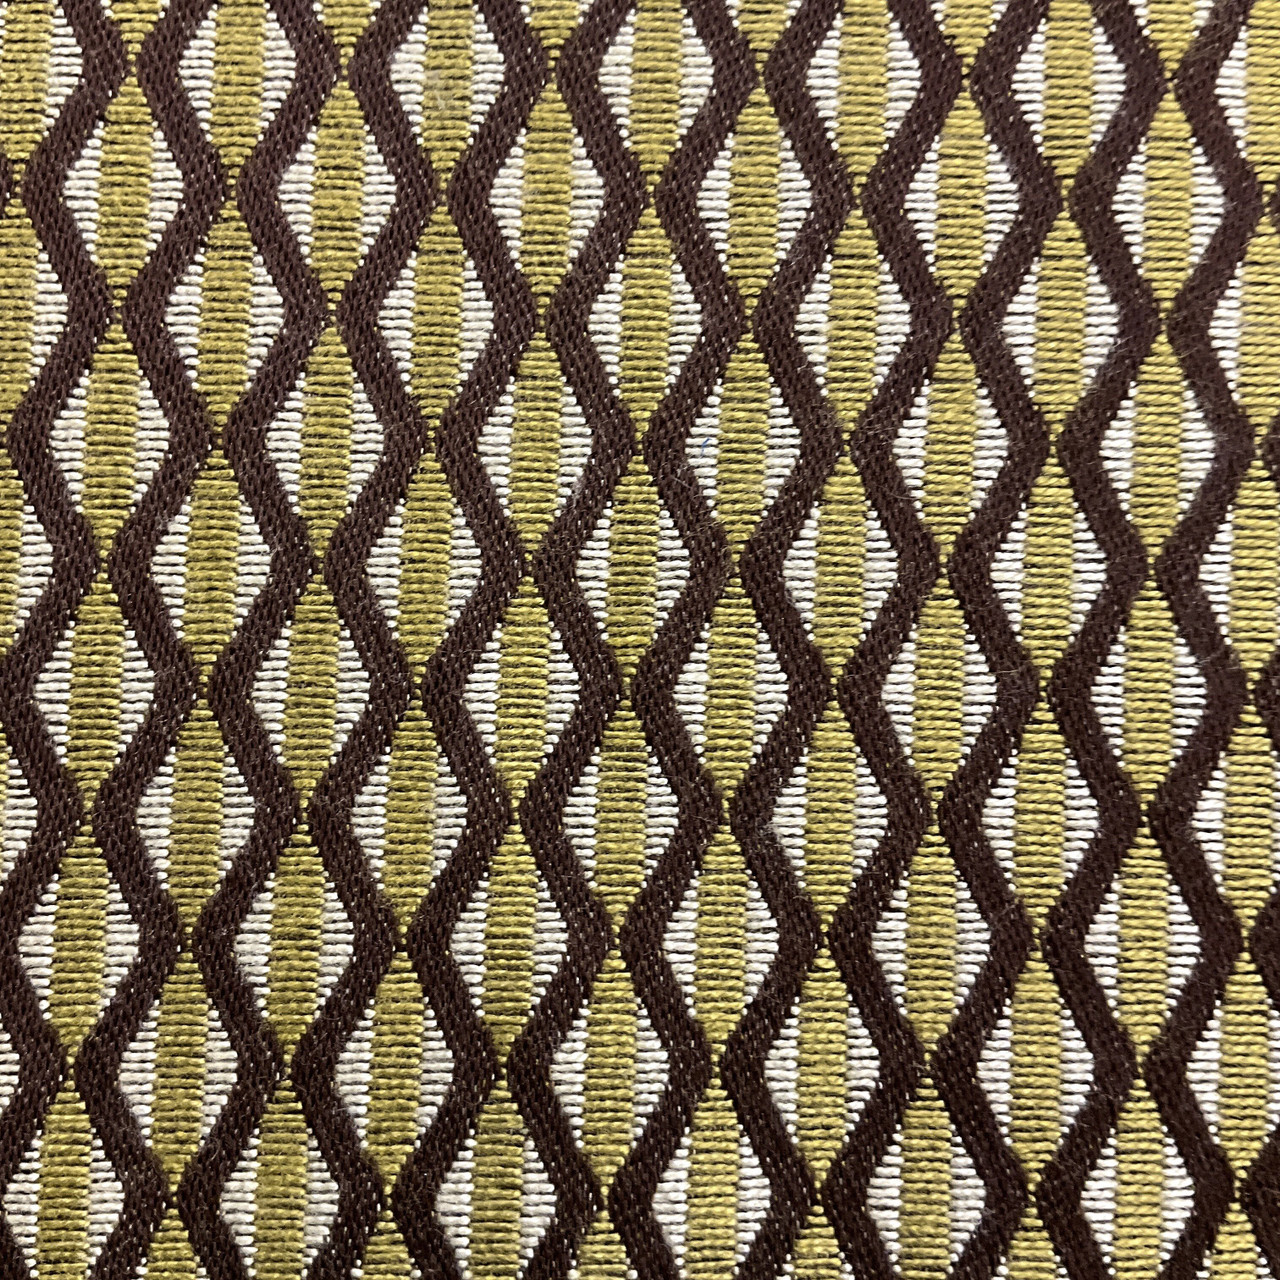 Geometric Upholstery Fabric for Chairs, Chic European Style Pattern Outdoor  Fabric by The Yard, Stripe Diamond Design Decorative Fabric for Upholstery